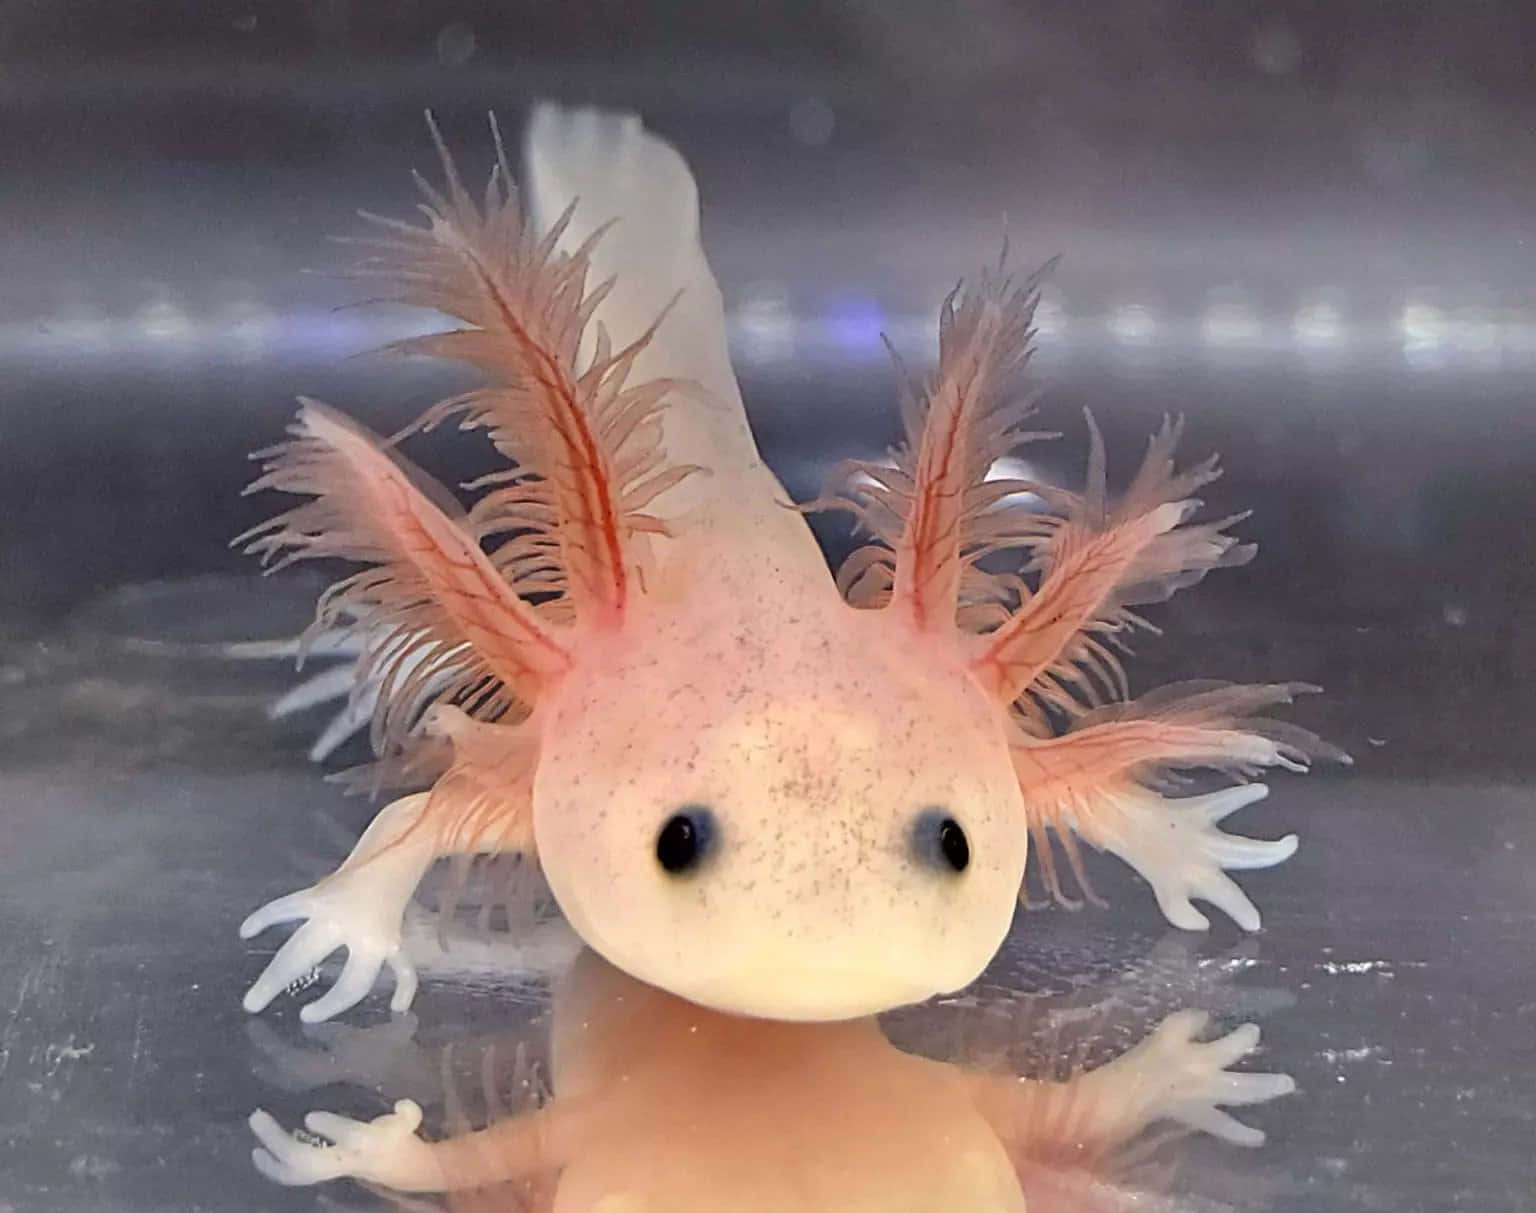 Playful axolotl, ready to explore its new home